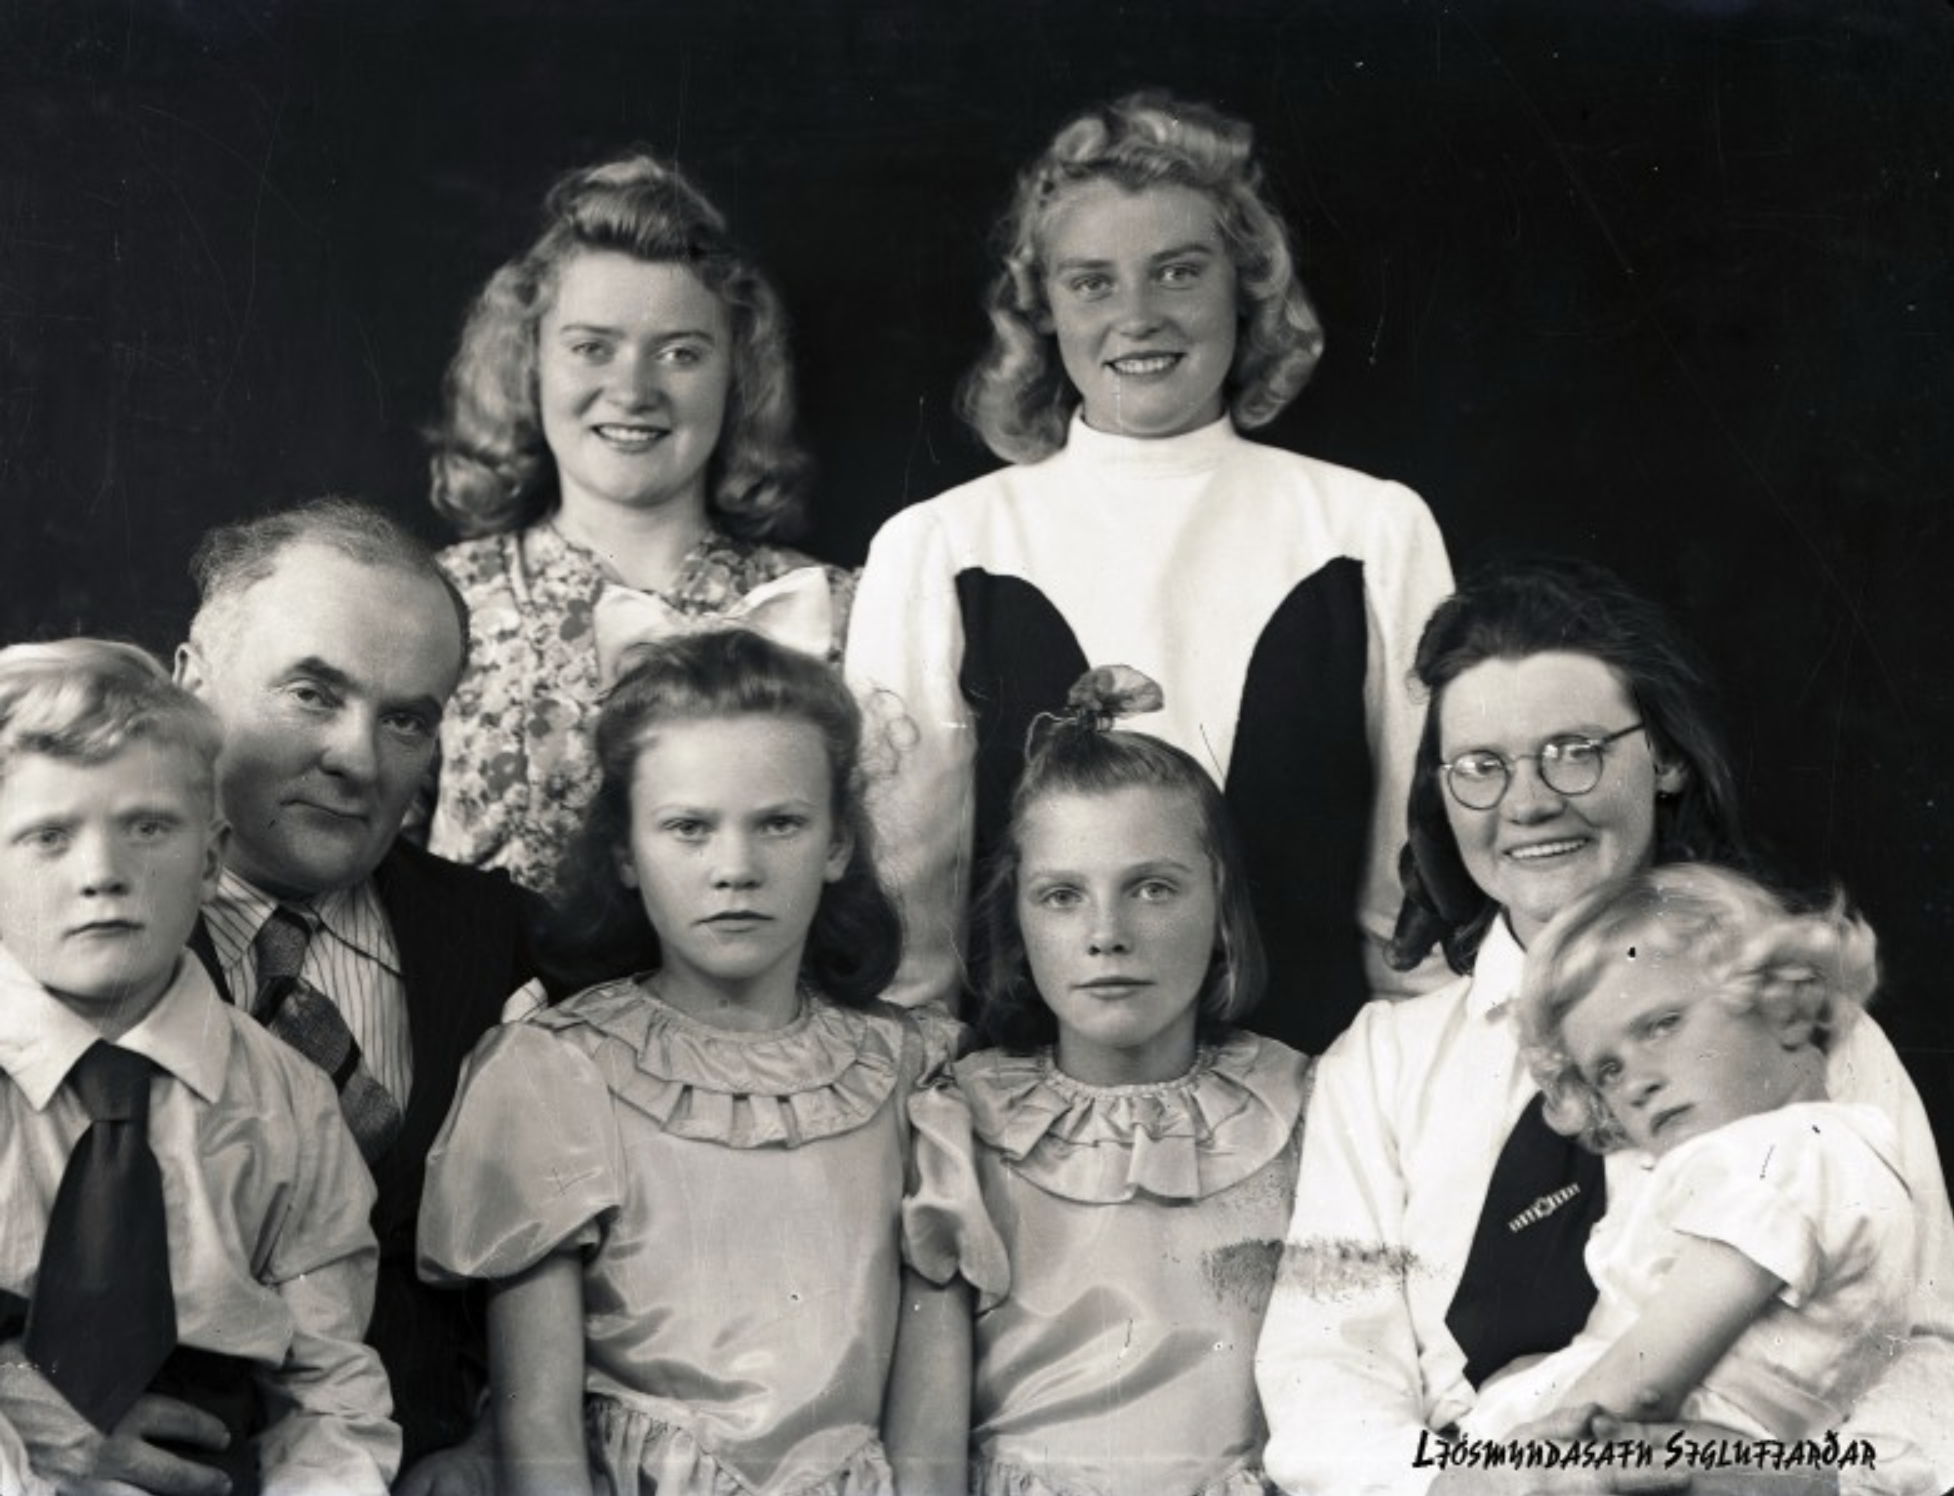 Hulda Karen, standing on the right, with her parents and siblings